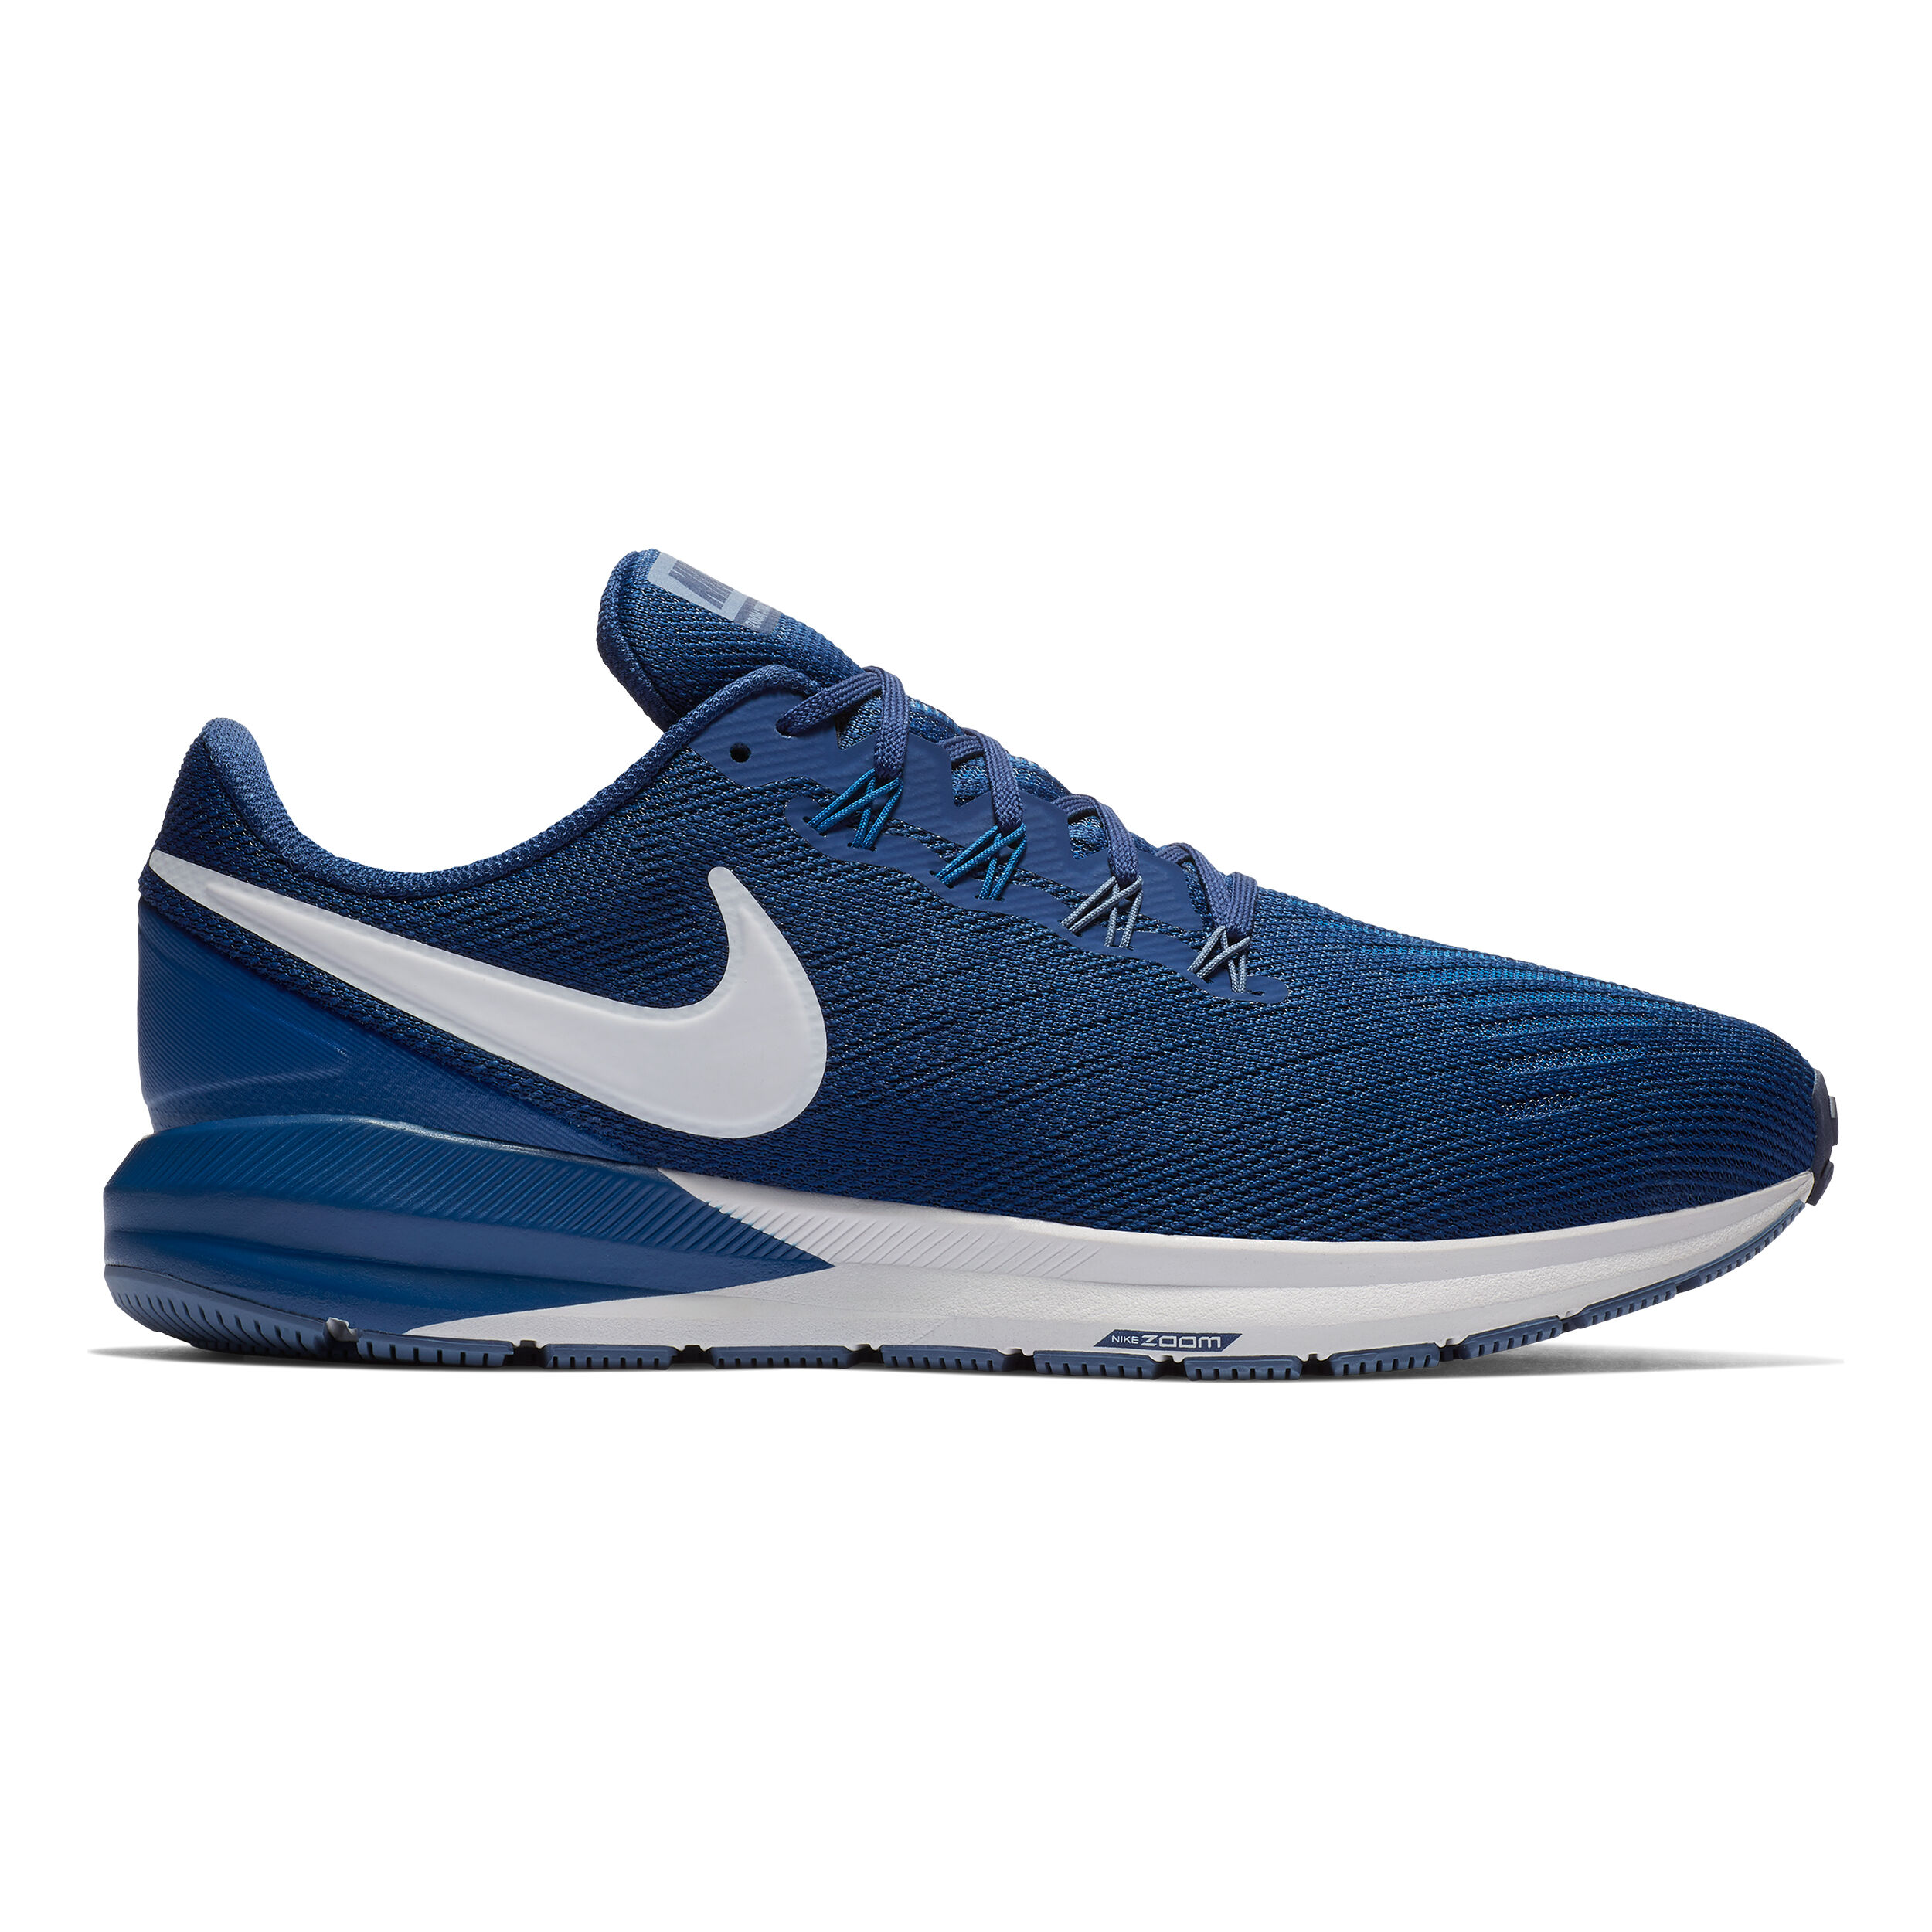 nike men's stability running shoes